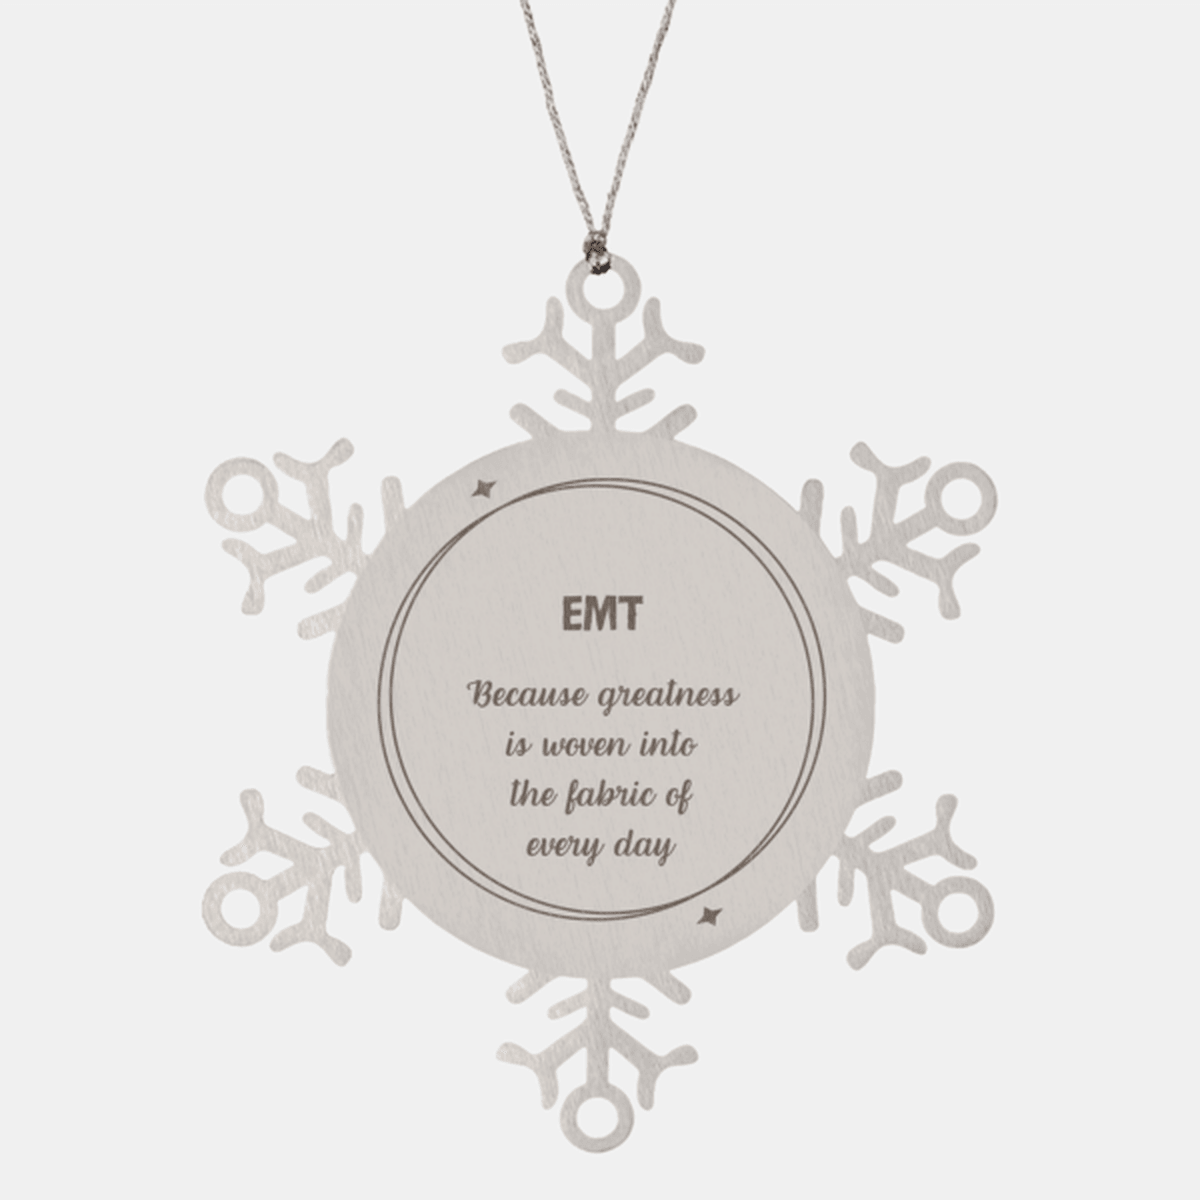 Sarcastic EMT Snowflake Ornament Gifts, Christmas Holiday Gifts for EMT Ornament, EMT: Because greatness is woven into the fabric of every day, Coworkers, Friends - Mallard Moon Gift Shop